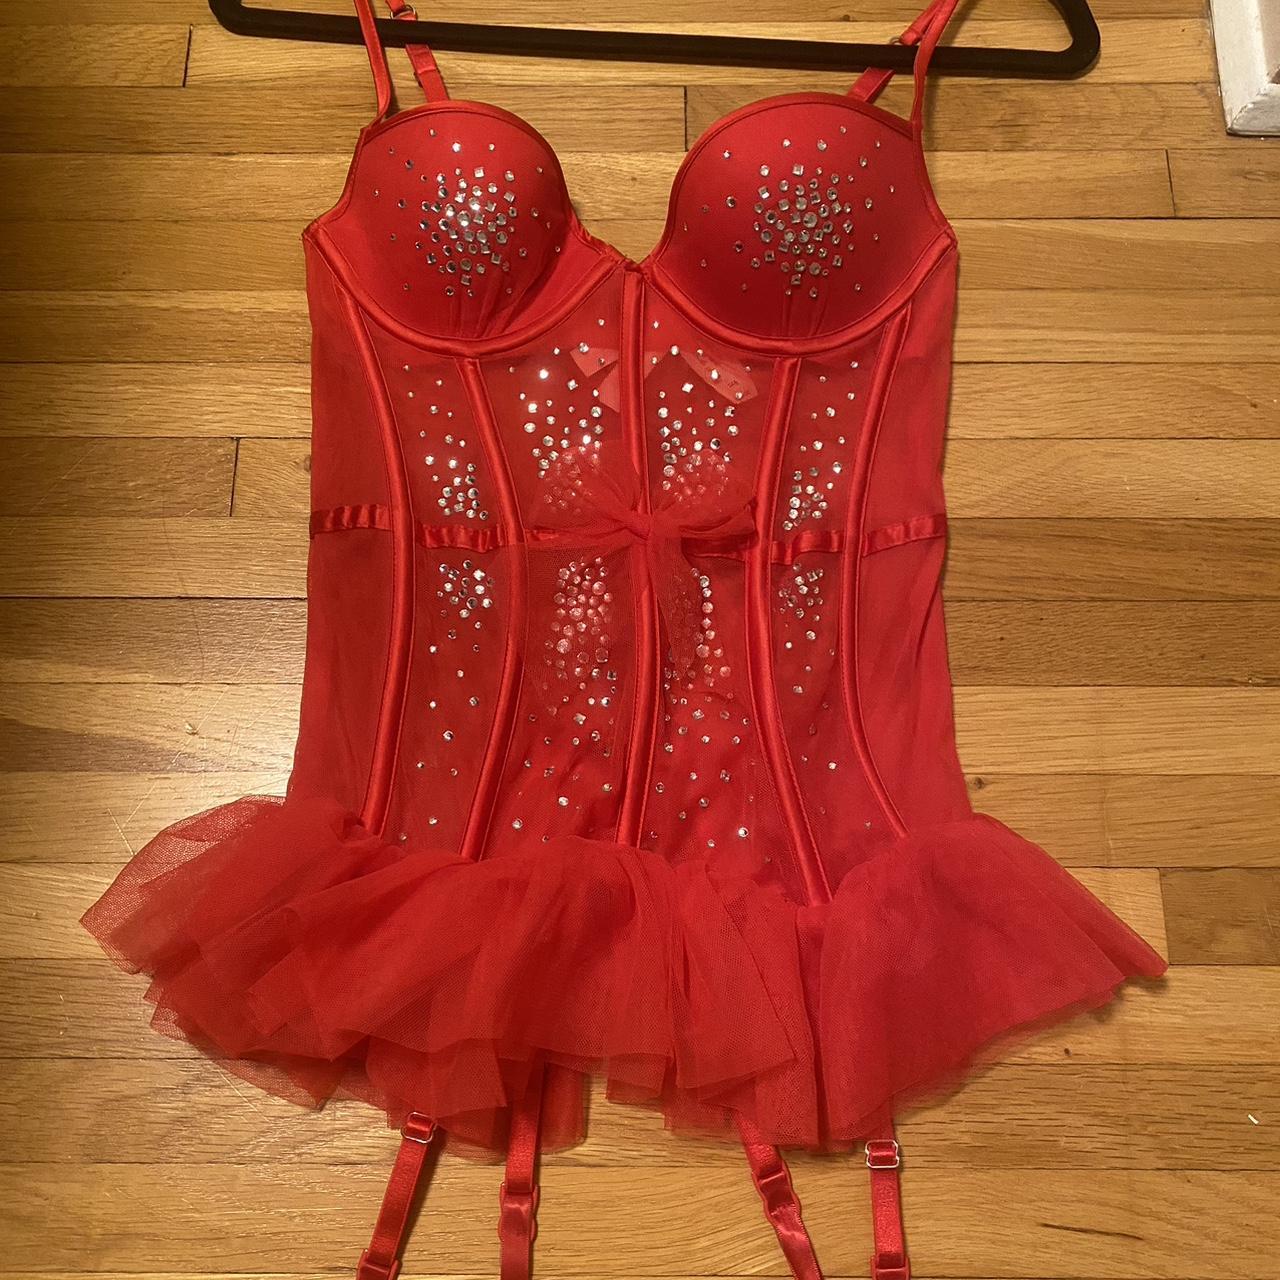 STUNNING nwt Victoria’s Secret red bedazzled corset.